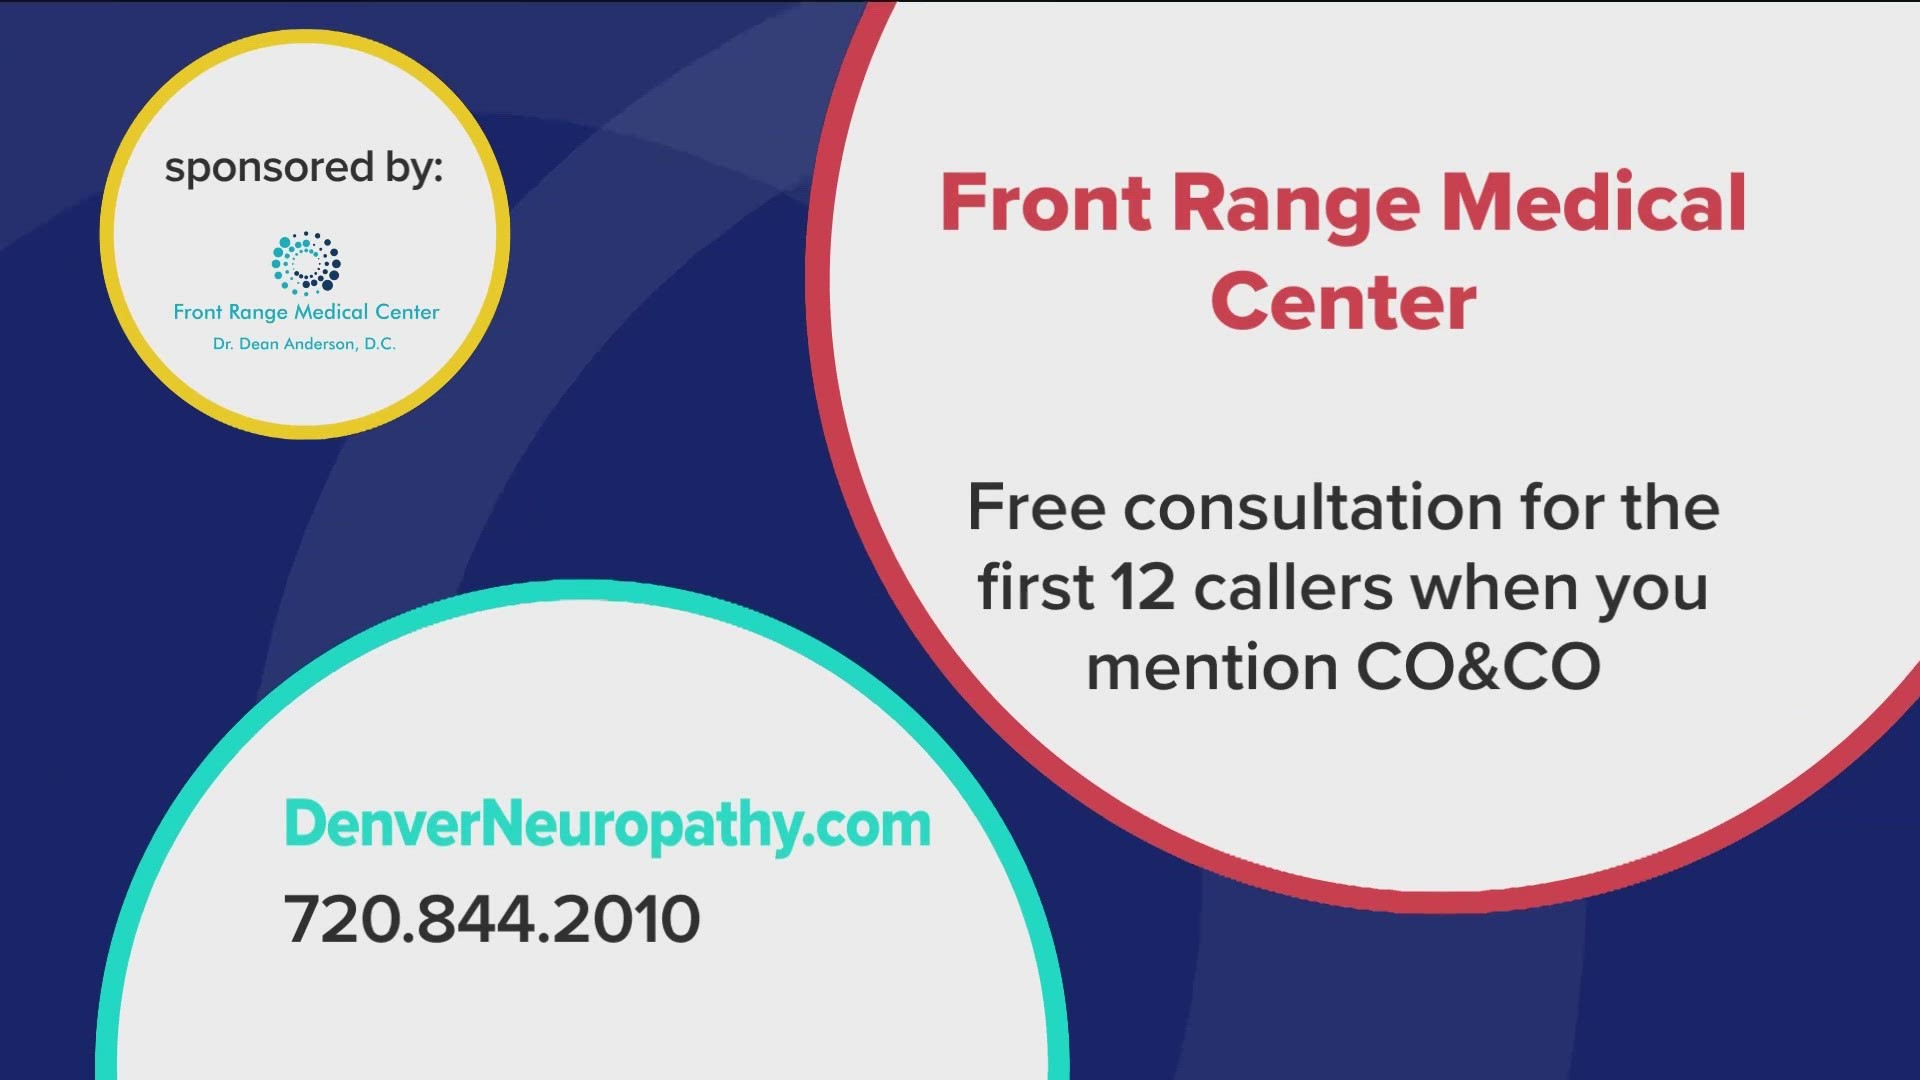 The first 12 to call 720.844.2010 will qualify for a free consultation. Learn more at DenverNeuropathy.com. **PAID CONTENT